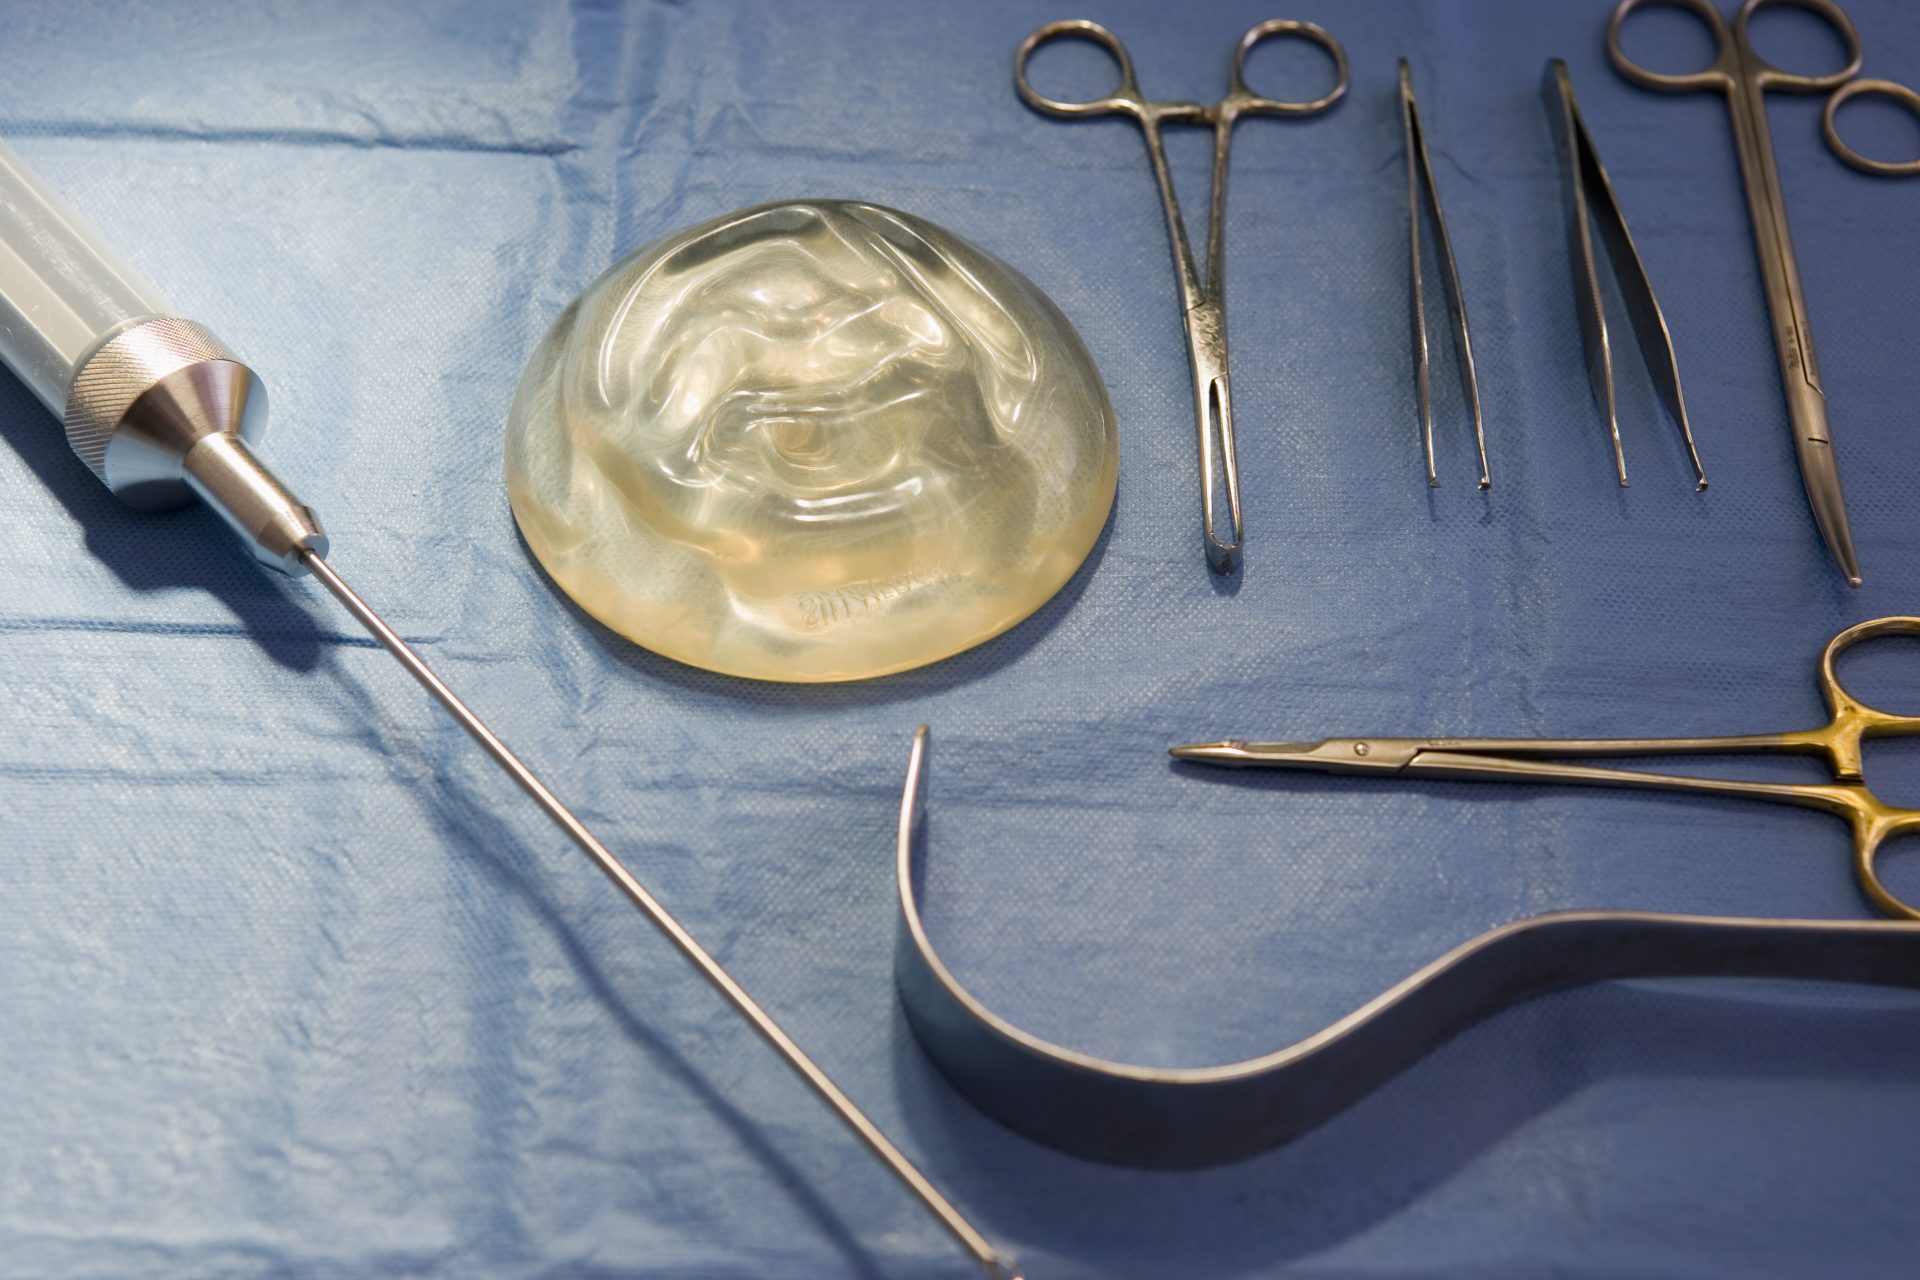 I called it my uniboob — one woman's plastic surgery experience